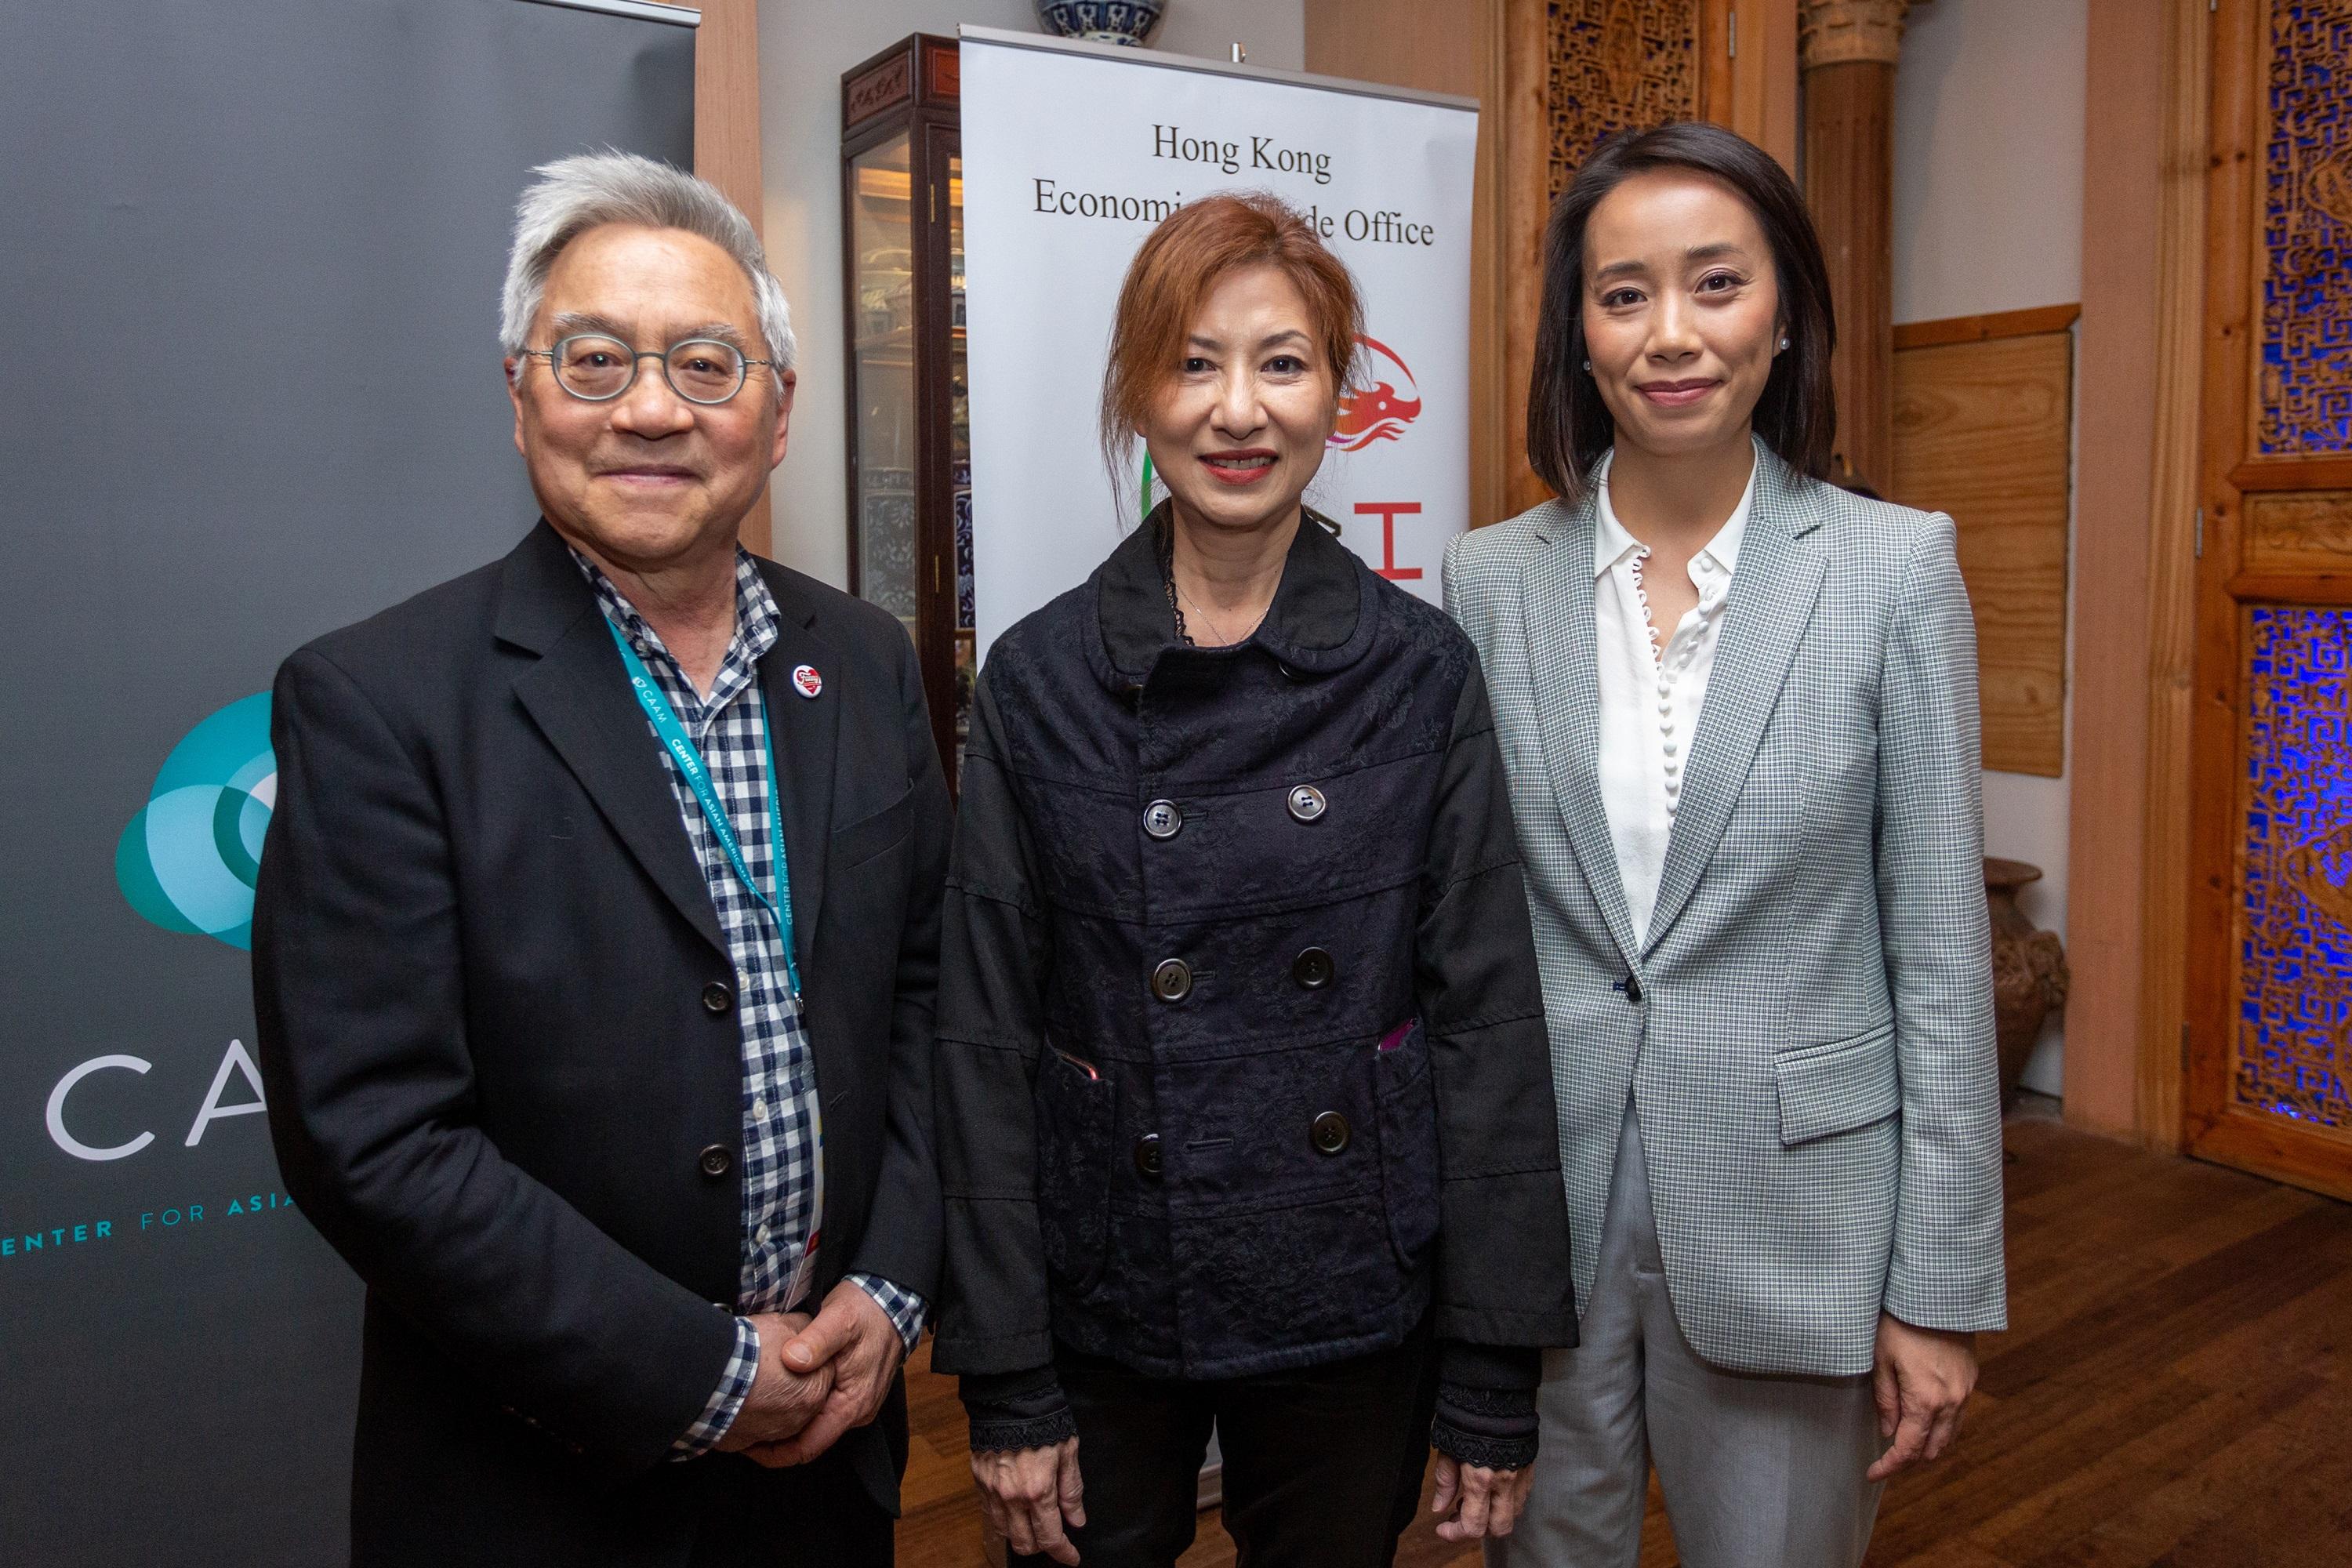 The Hong Kong Economic and Trade Office in San Francisco (HKETO San Francisco) partnered with CAAMFest for a special Hong Kong Cinema Showcase in its 2023 edition from May 11 to 21 (San Francisco time). Photo shows the Director of HKETO San Francisco, Ms Jacko Tsang (right), the director of "Twelve Days", Aubrey Lam (centre), and the Executive Director of the Center for Asian American Media, Mr Stephen Gong (left), at the pre-screening reception of "Twelve Days" on May 19 (San Francisco time).